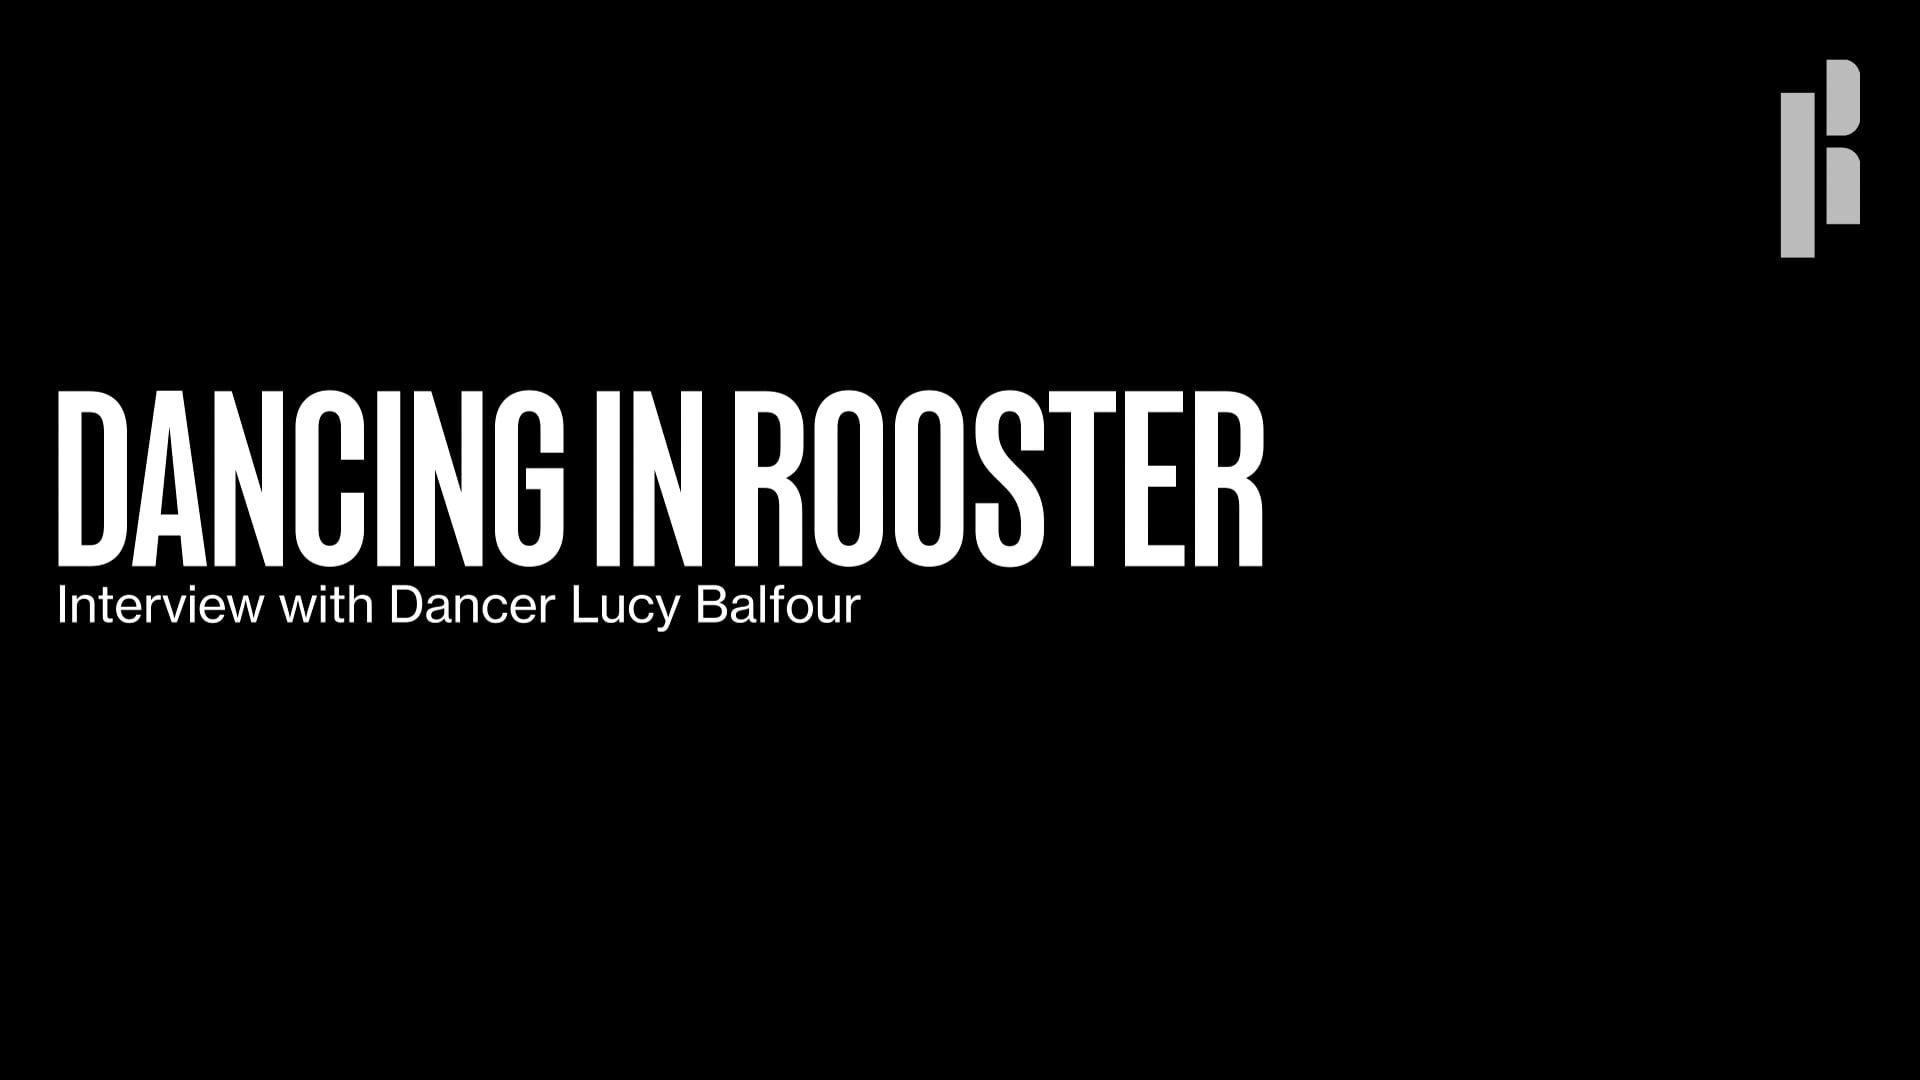 Dancing in rooster - interview with dancer lucy editor.